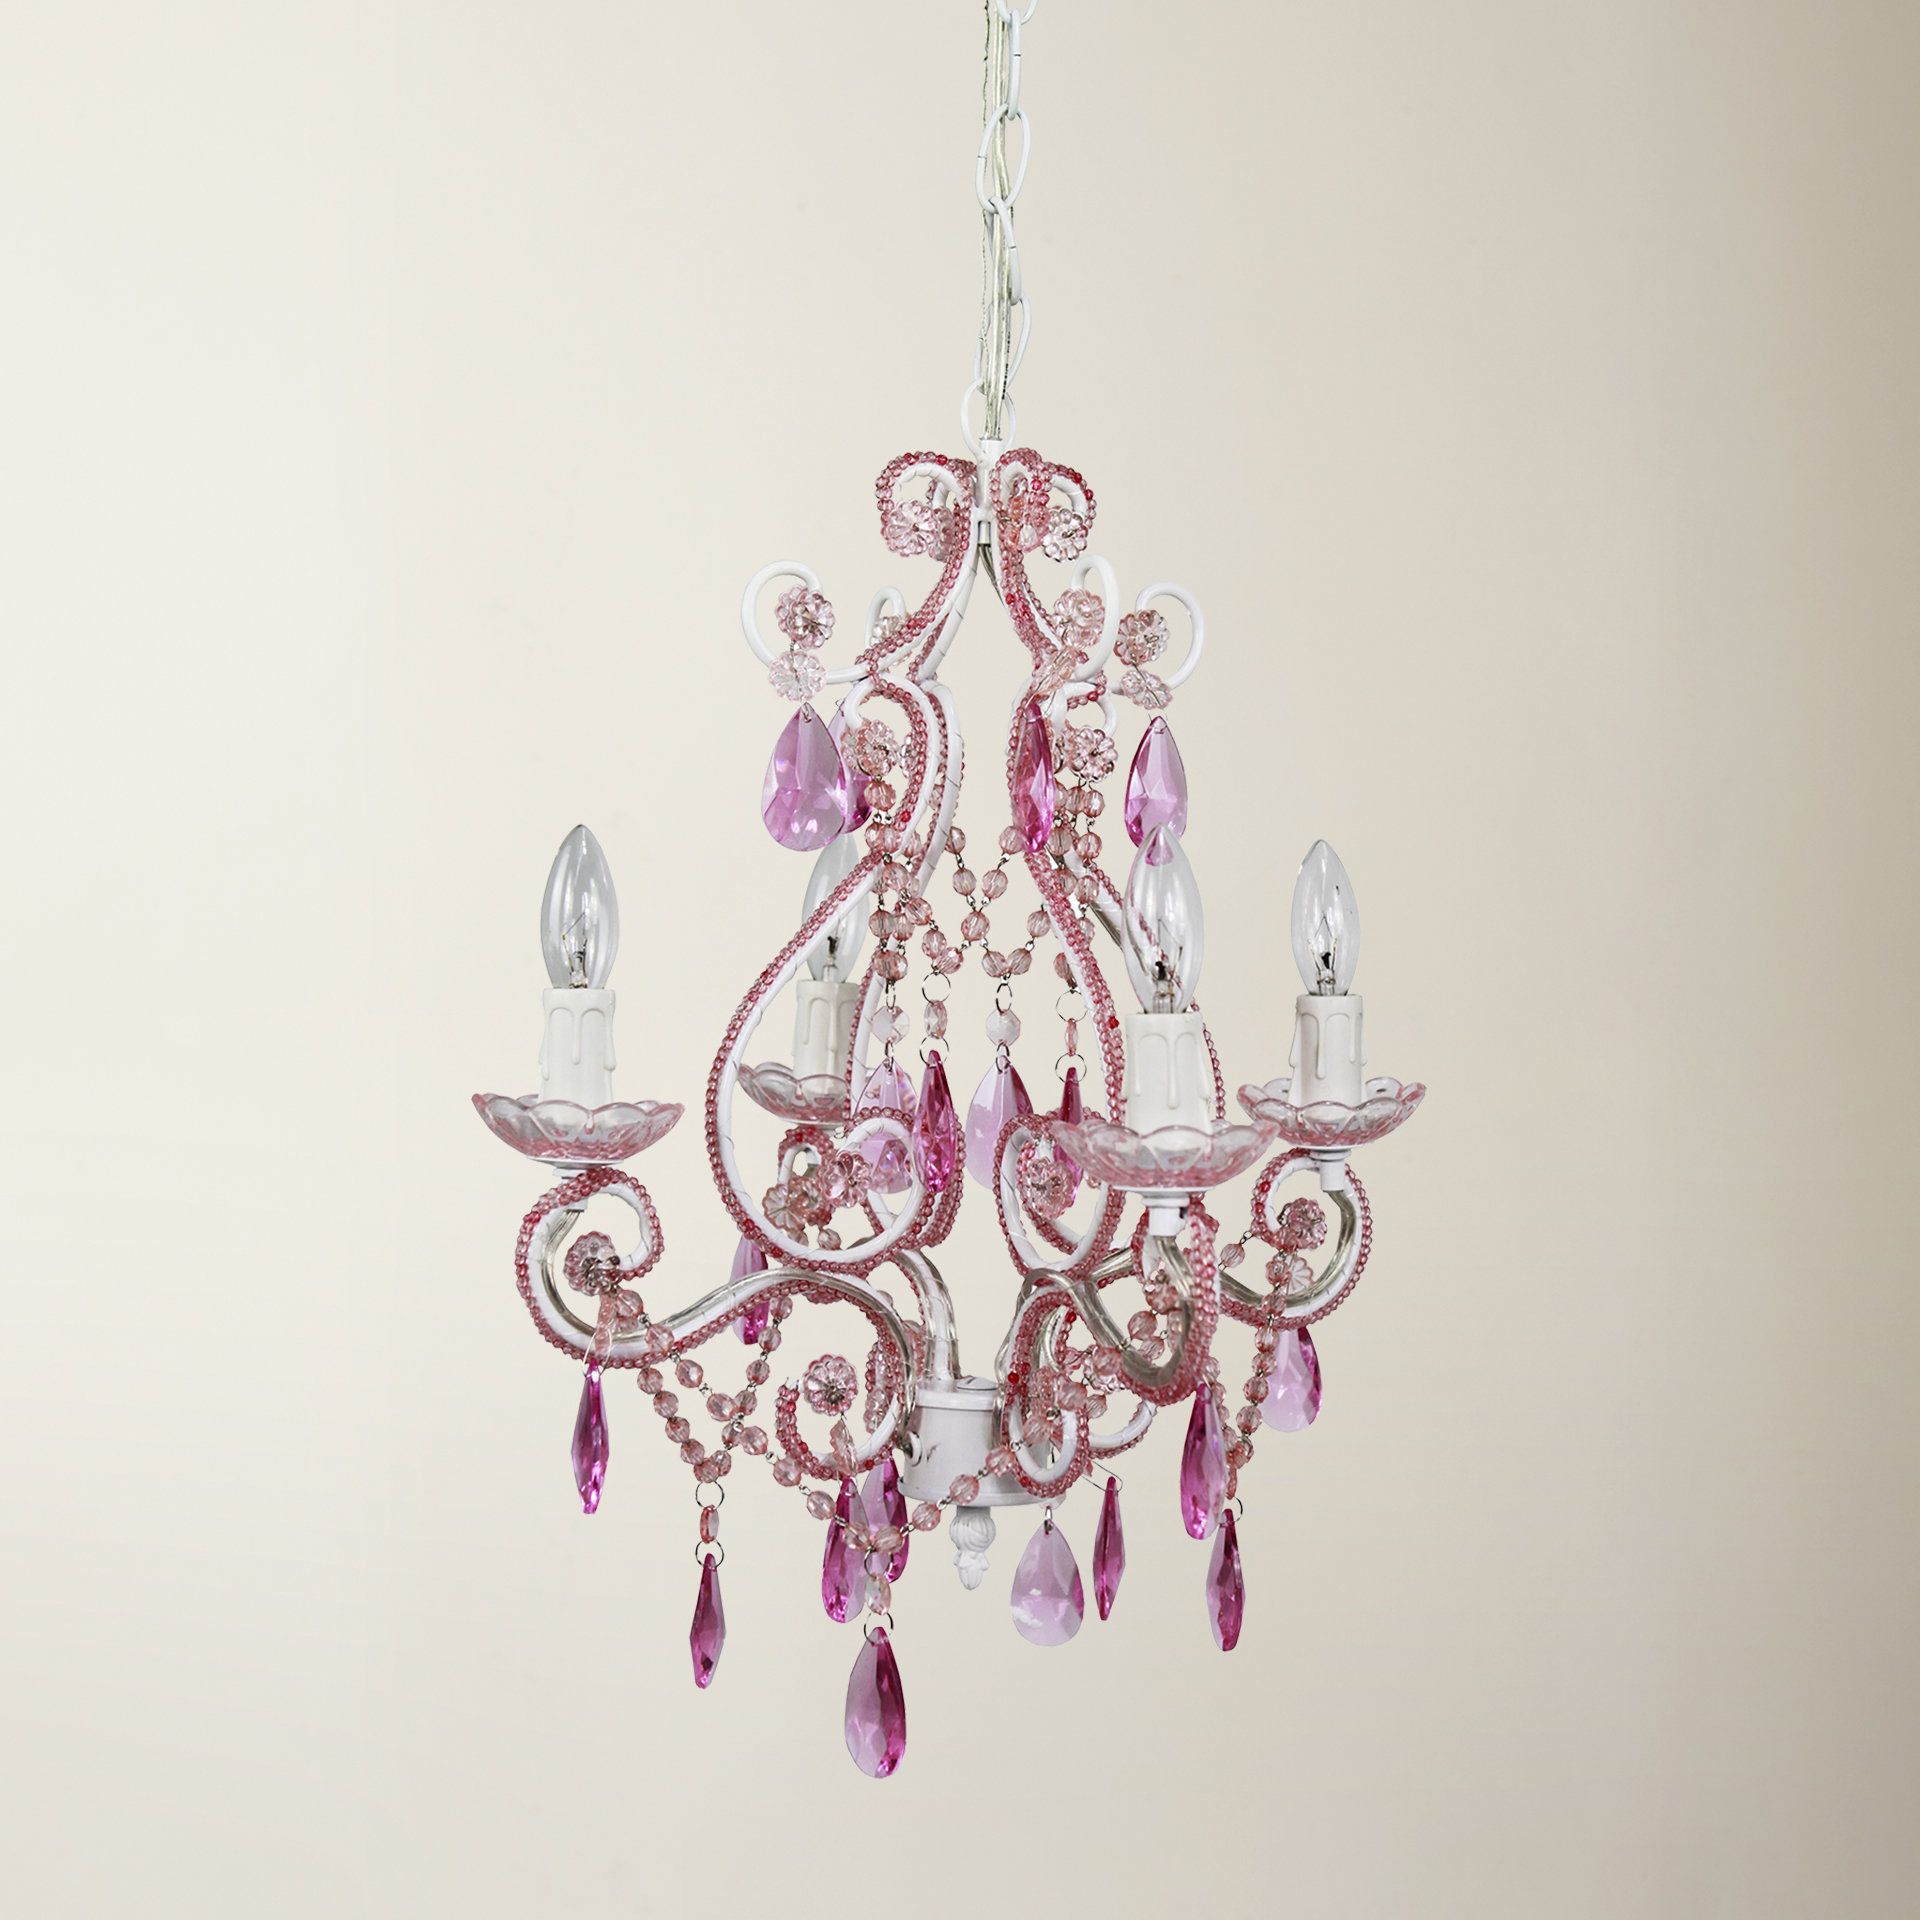 Most Recently Released Aldora 4 Light Candle Style Chandelier Pertaining To Aldora 4 Light Candle Style Chandeliers (View 1 of 25)